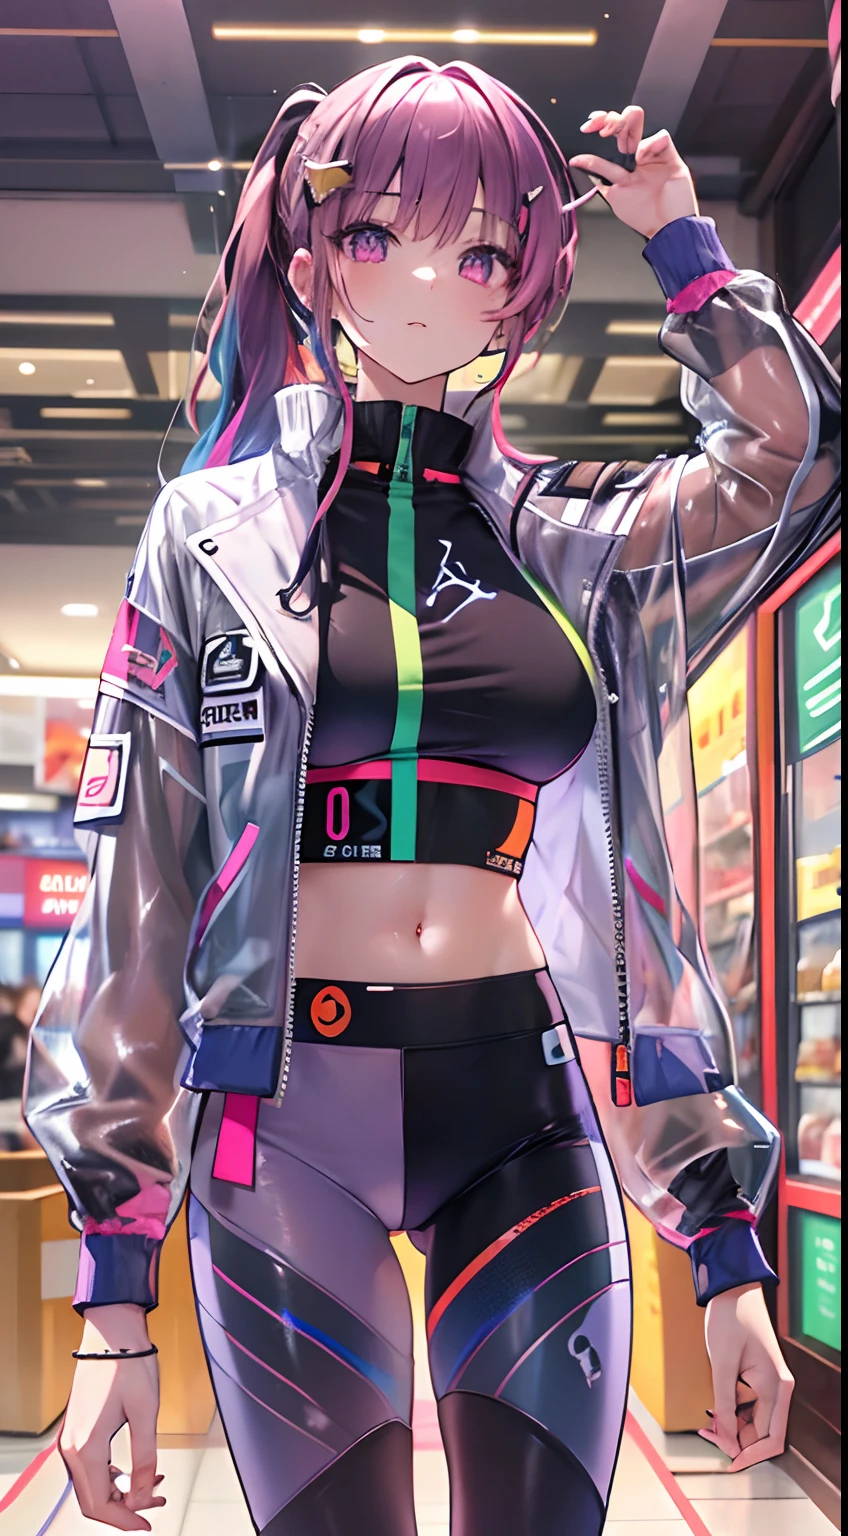 Anime girl in a futuristic outfit standing in a mall - SeaArt AI